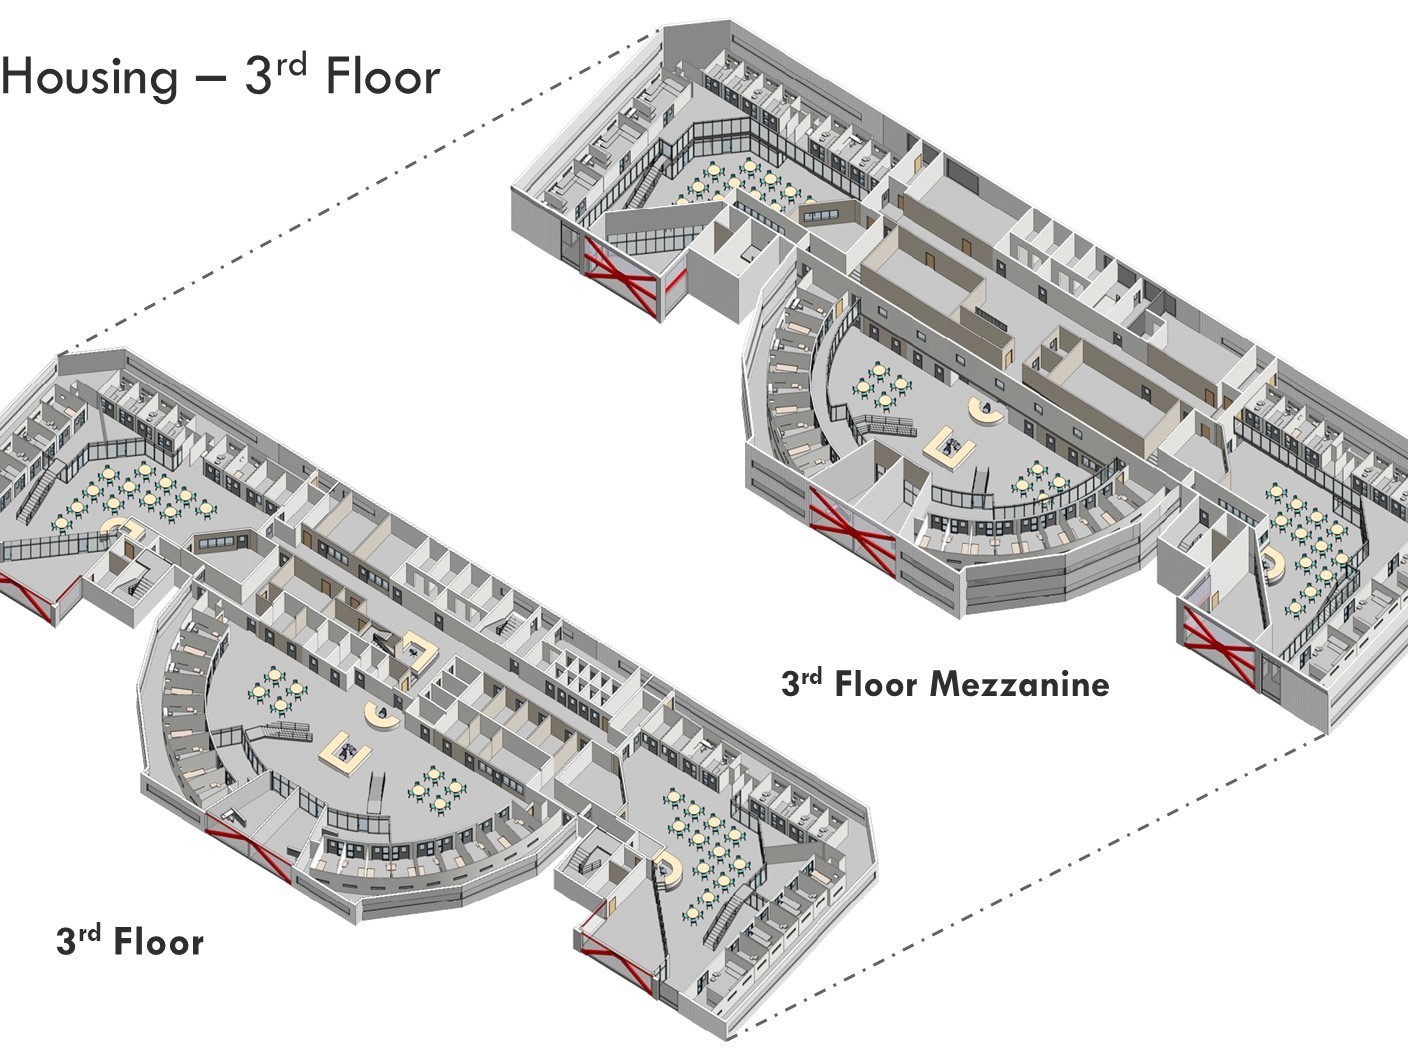 A rendering of the 3rd floor (left) and 3rd floor mezzanine (right) showing how the housing blocks fit together